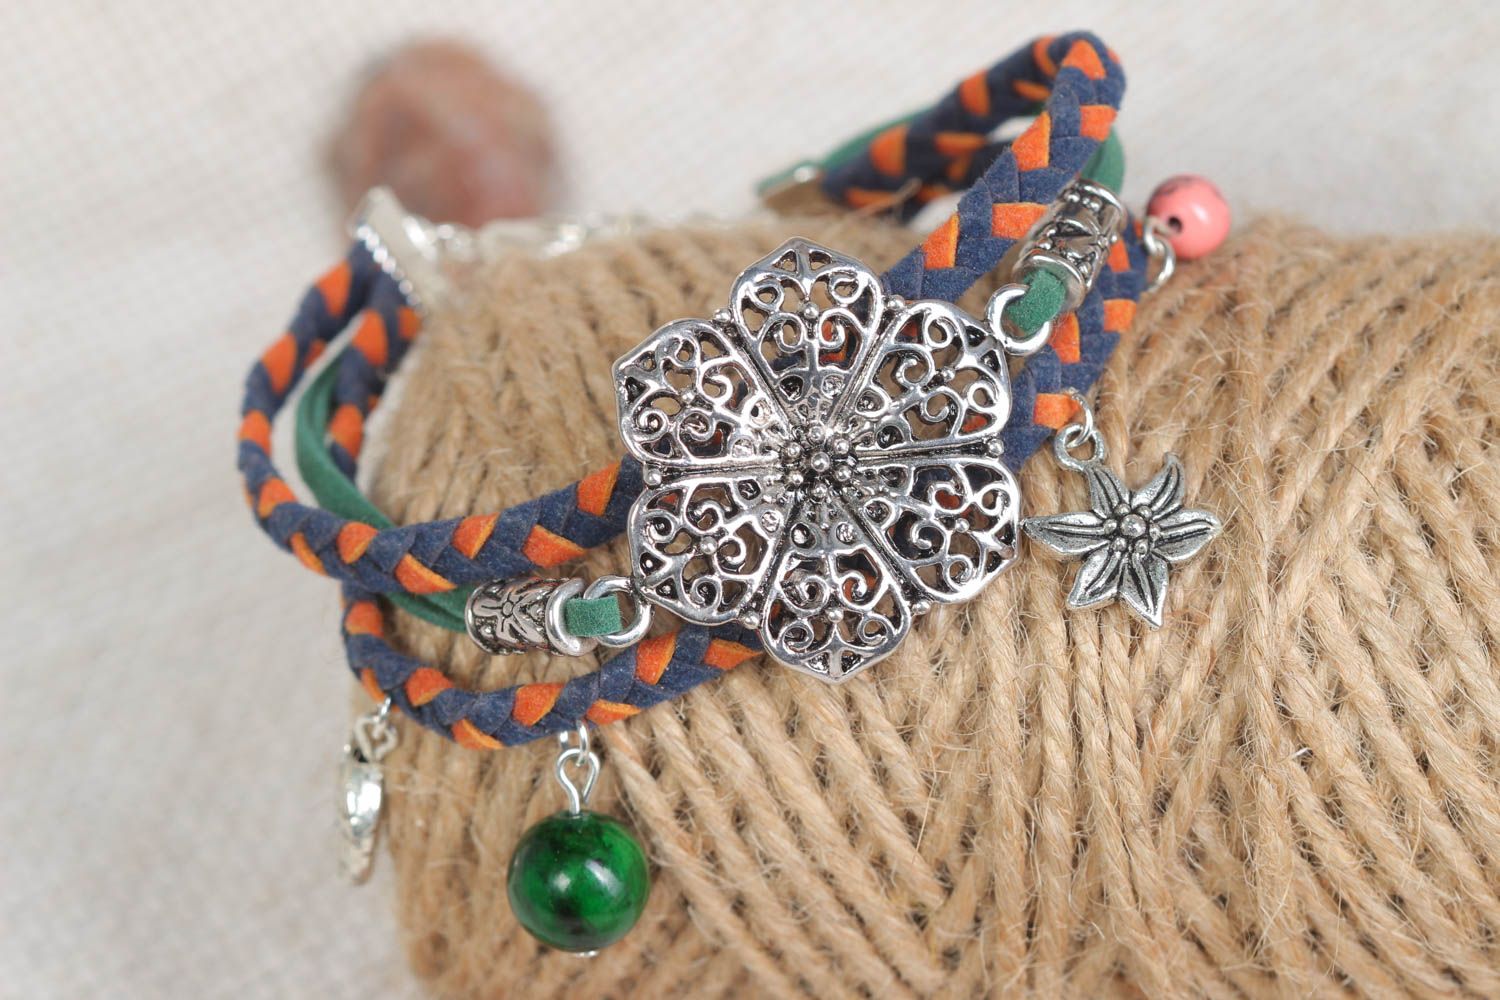 Handmade leather bracelet with charms fashion accessories jewelry designs photo 1